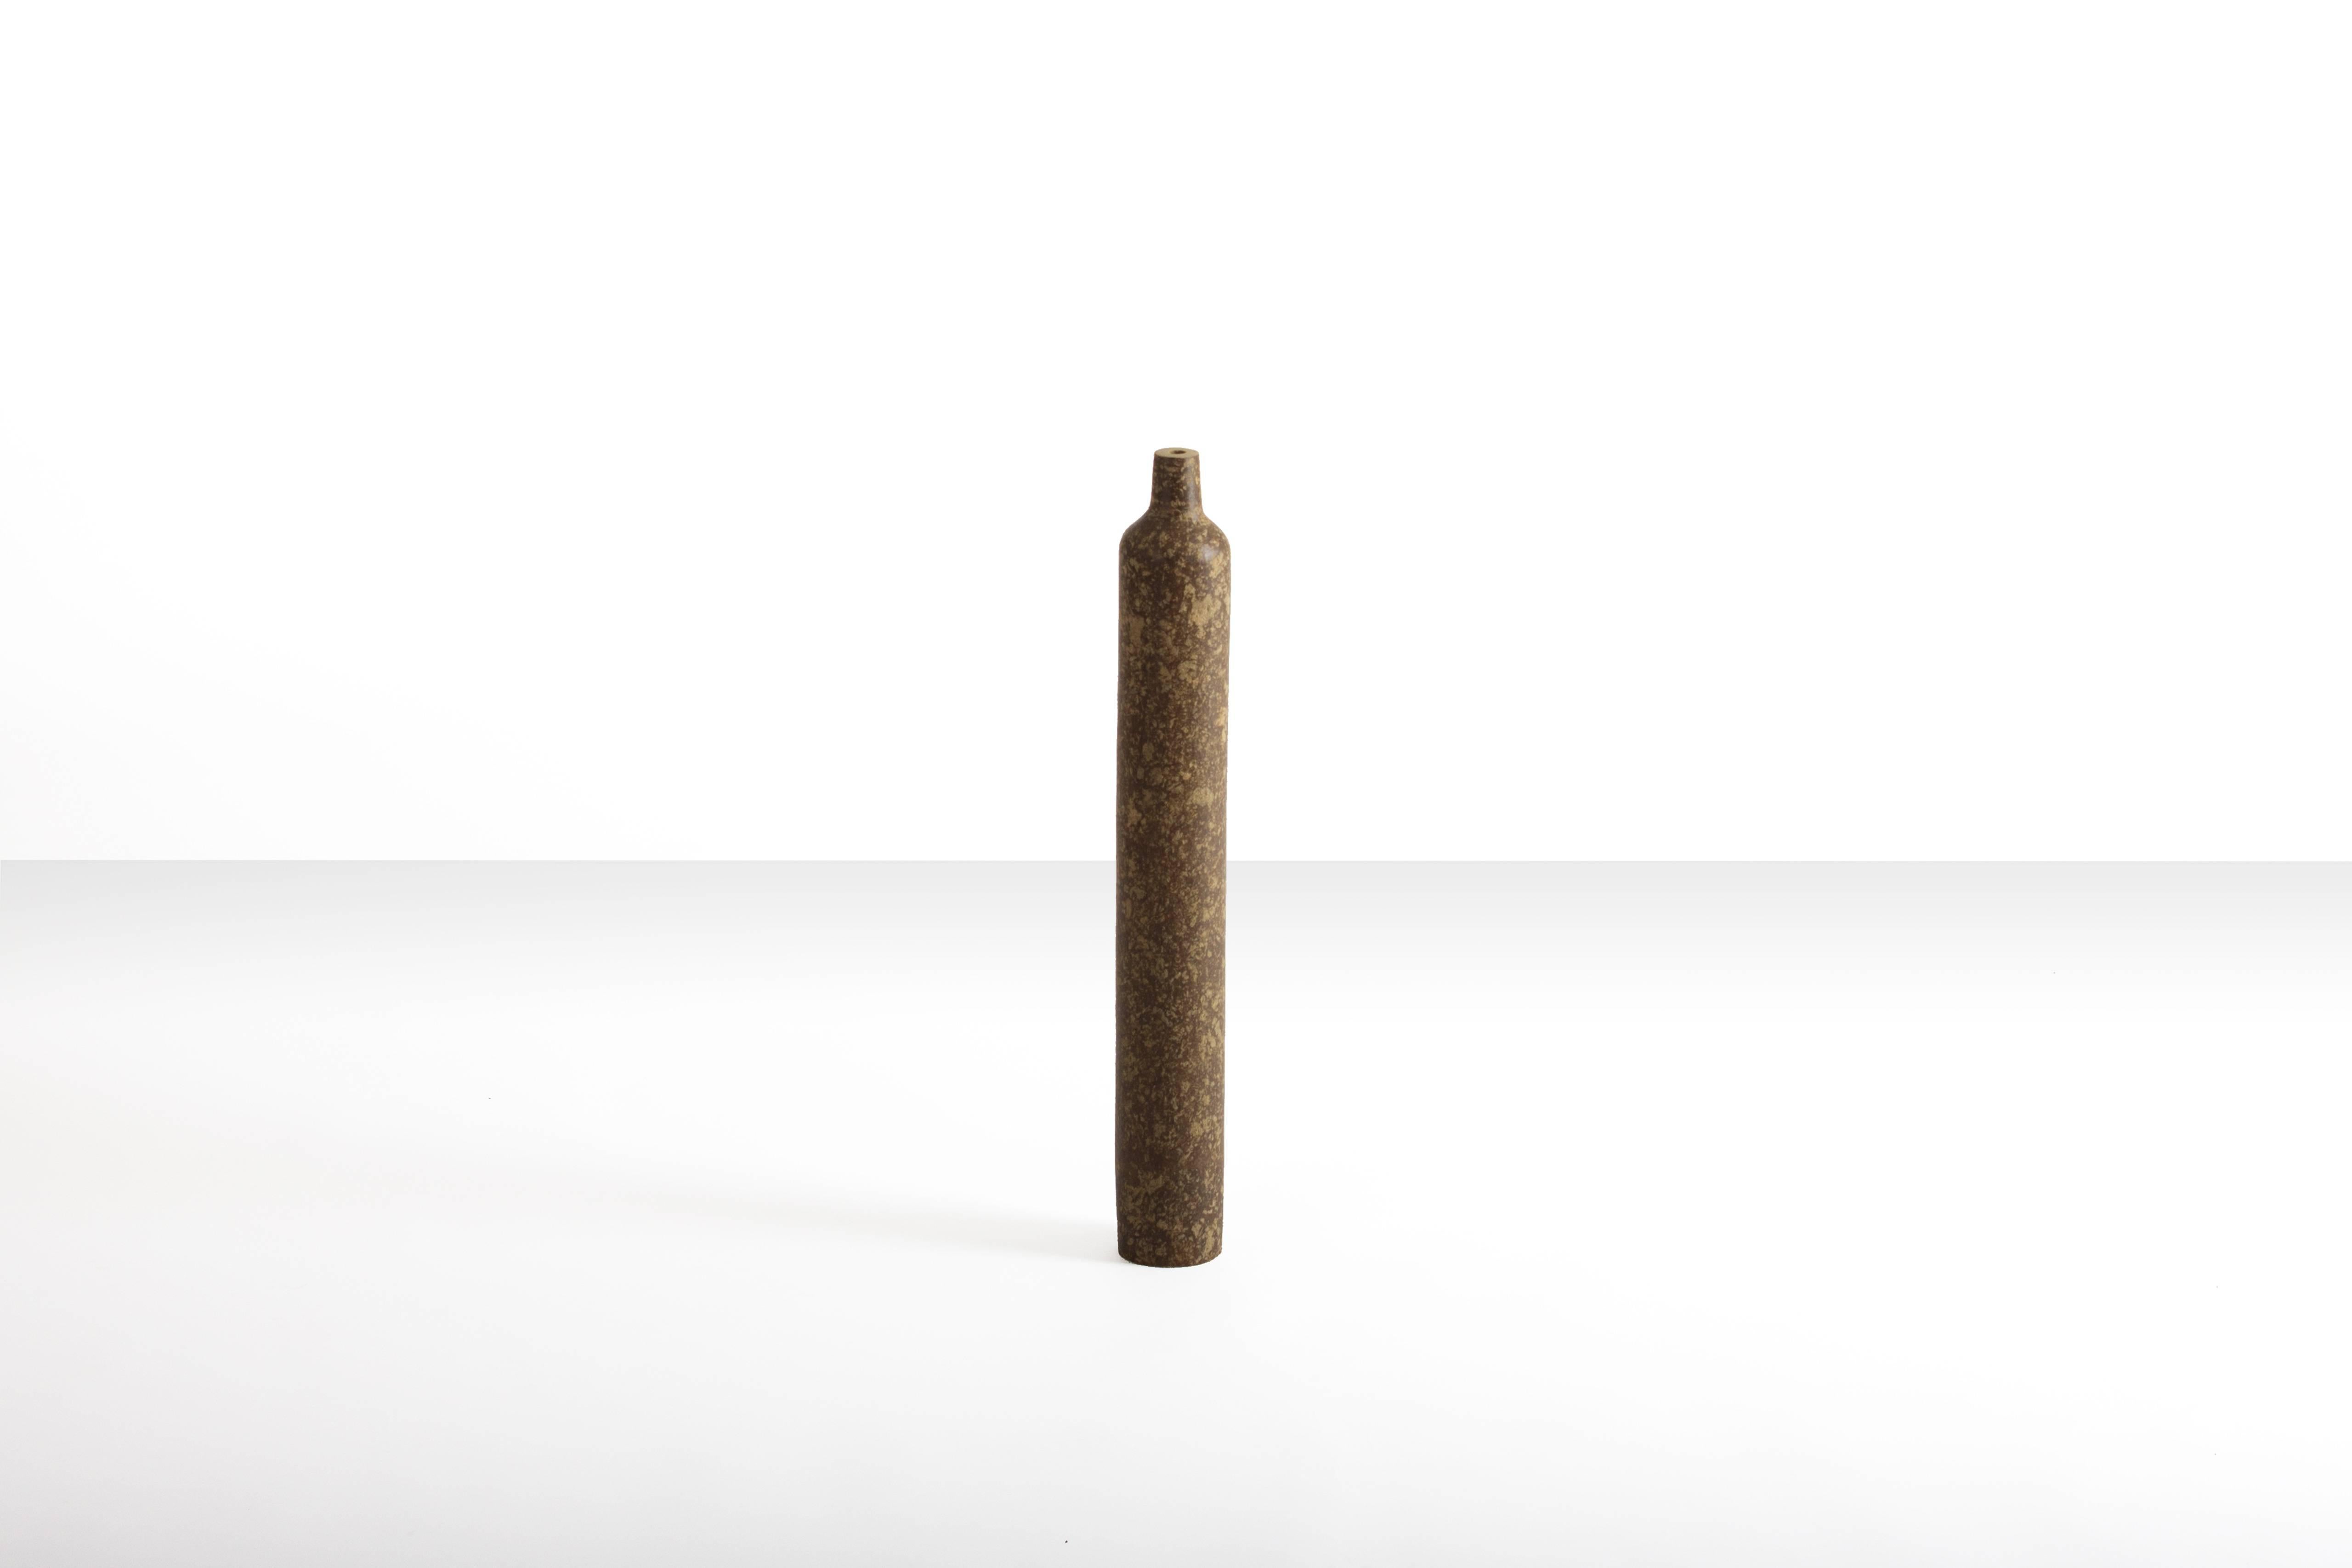 Medium ribbed Anfora vase by contemporary artist Domingos Tótora, made of recycled cardboard. Not suitable for water.

About the artist:
Domingos Tótora (born and raised in Maria da Fé, Brazil, 1960) creates objects and sculptures where beauty is